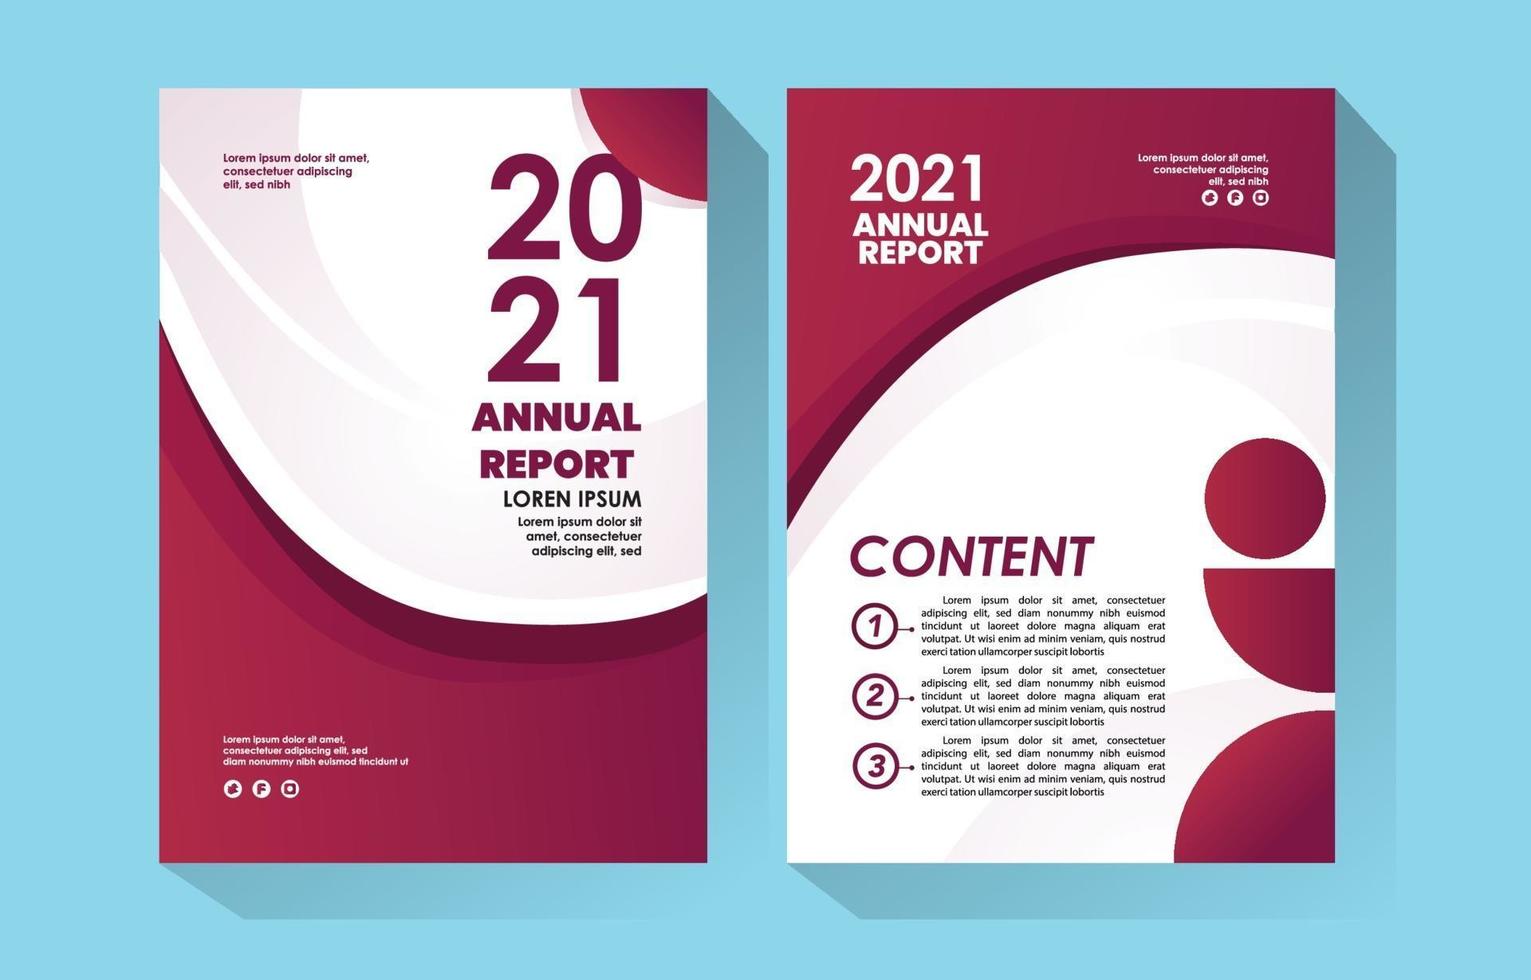 Annual Report 2021 Template with Simple Red Theme vector